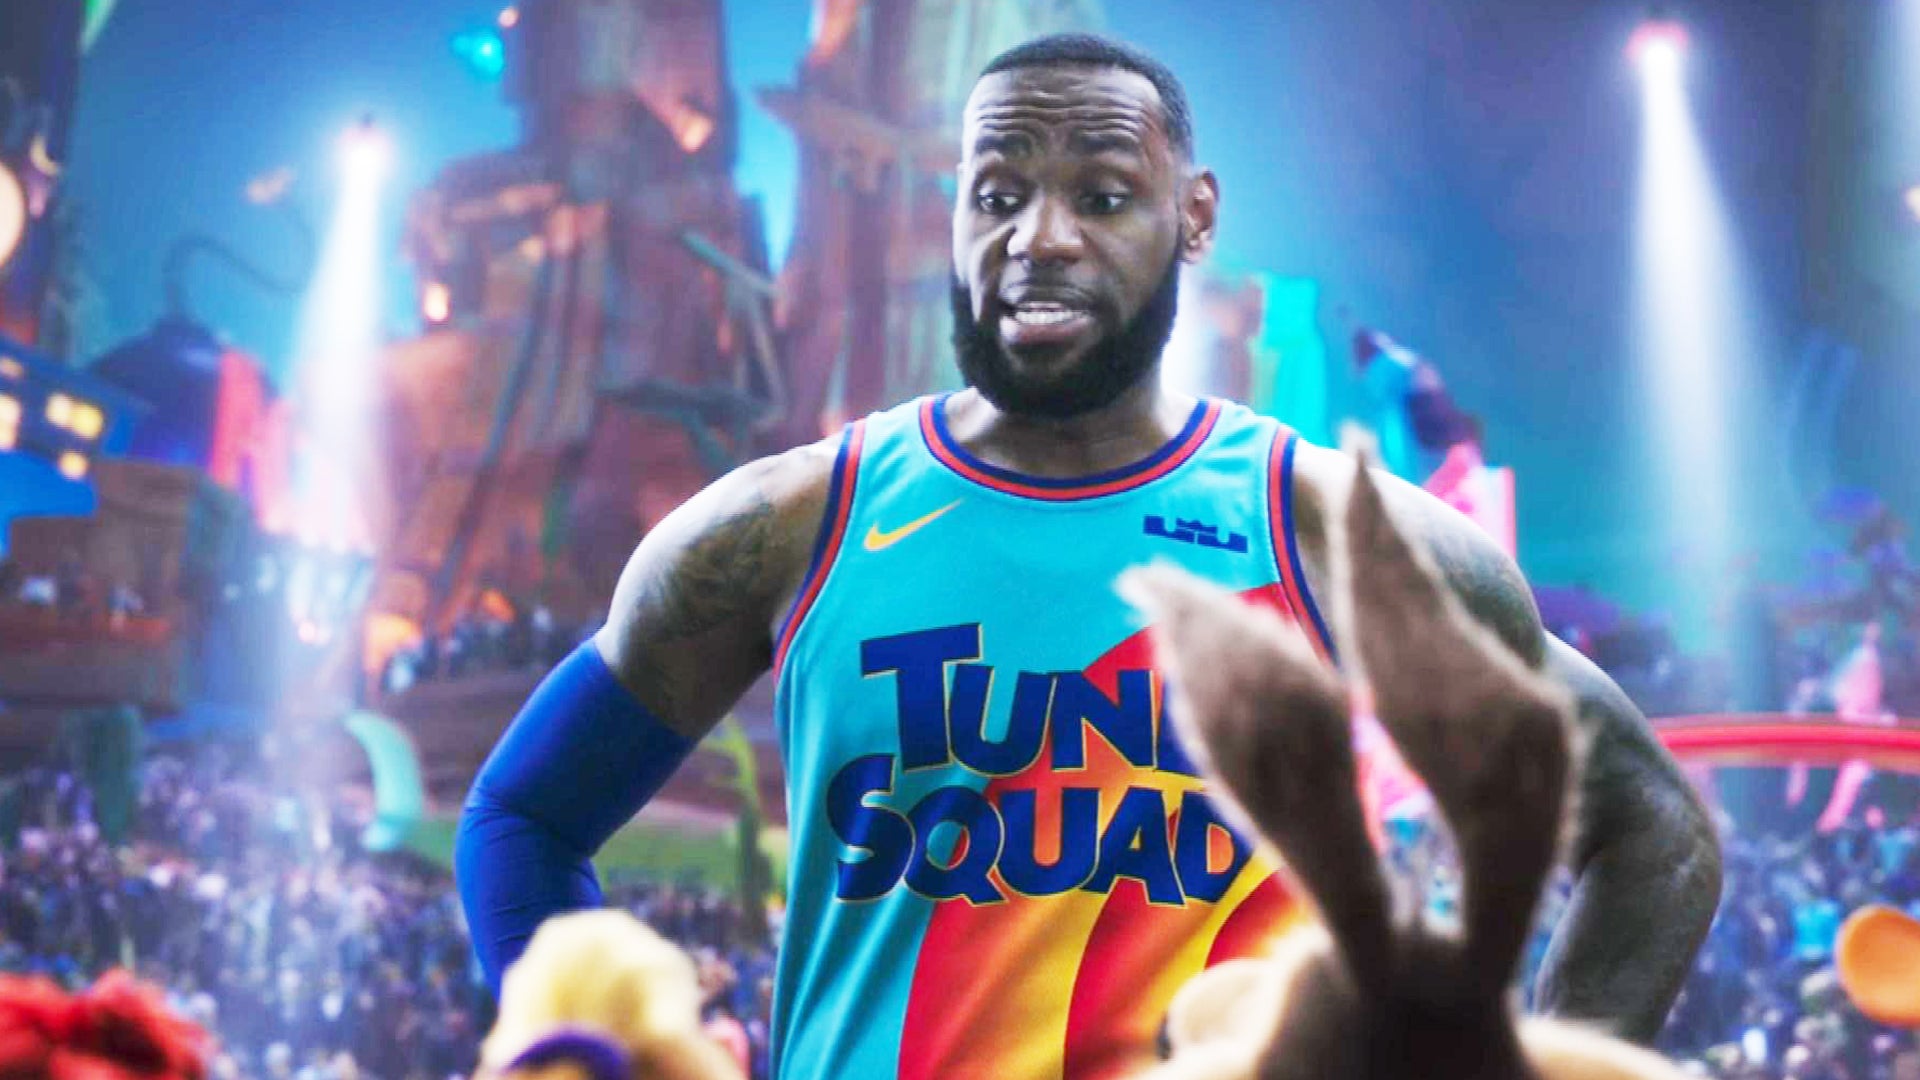 Space Jam: A New Legacy Tune Squad Jersey Meaning - Space Jam 2 Details  Number 6